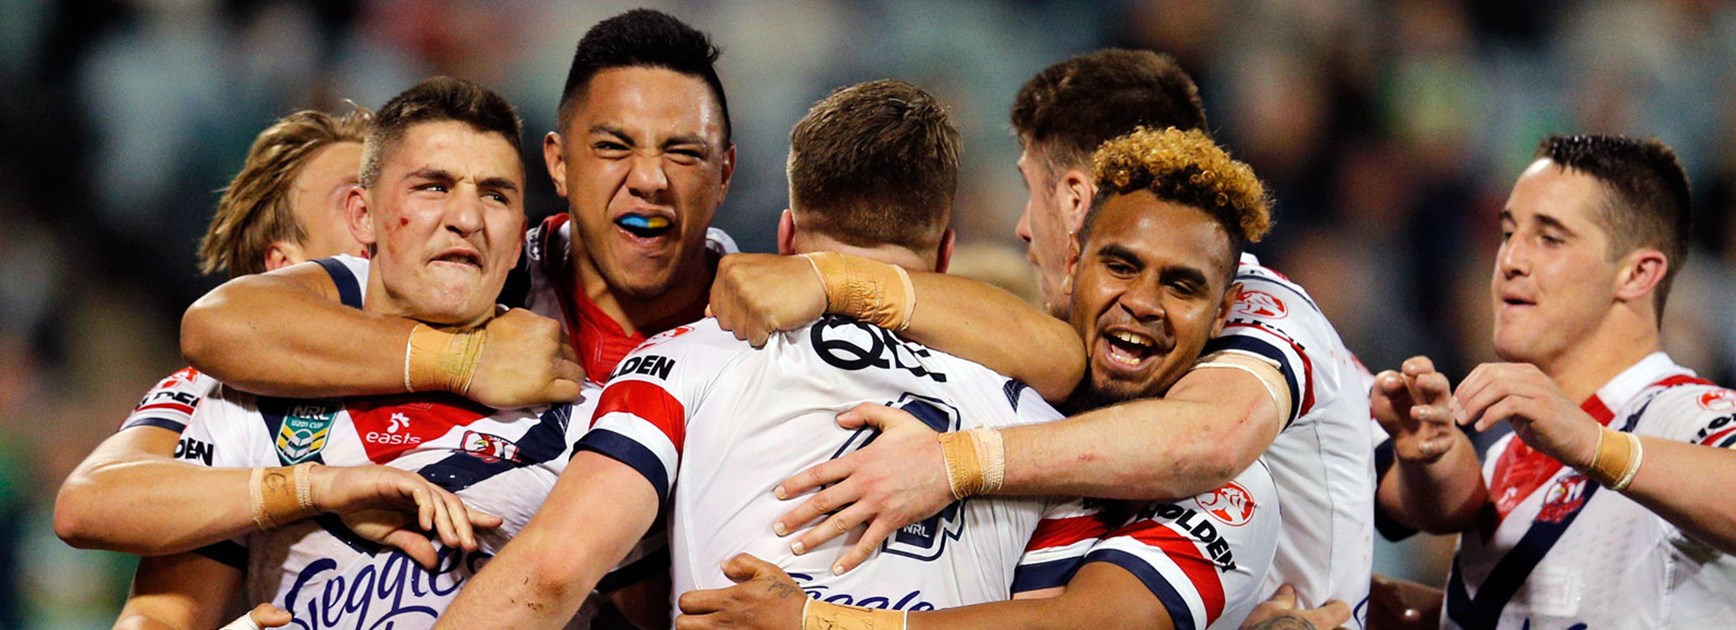 The NYC Roosters booked a preliminary finals berth with a win over the Sharks in Canberra.